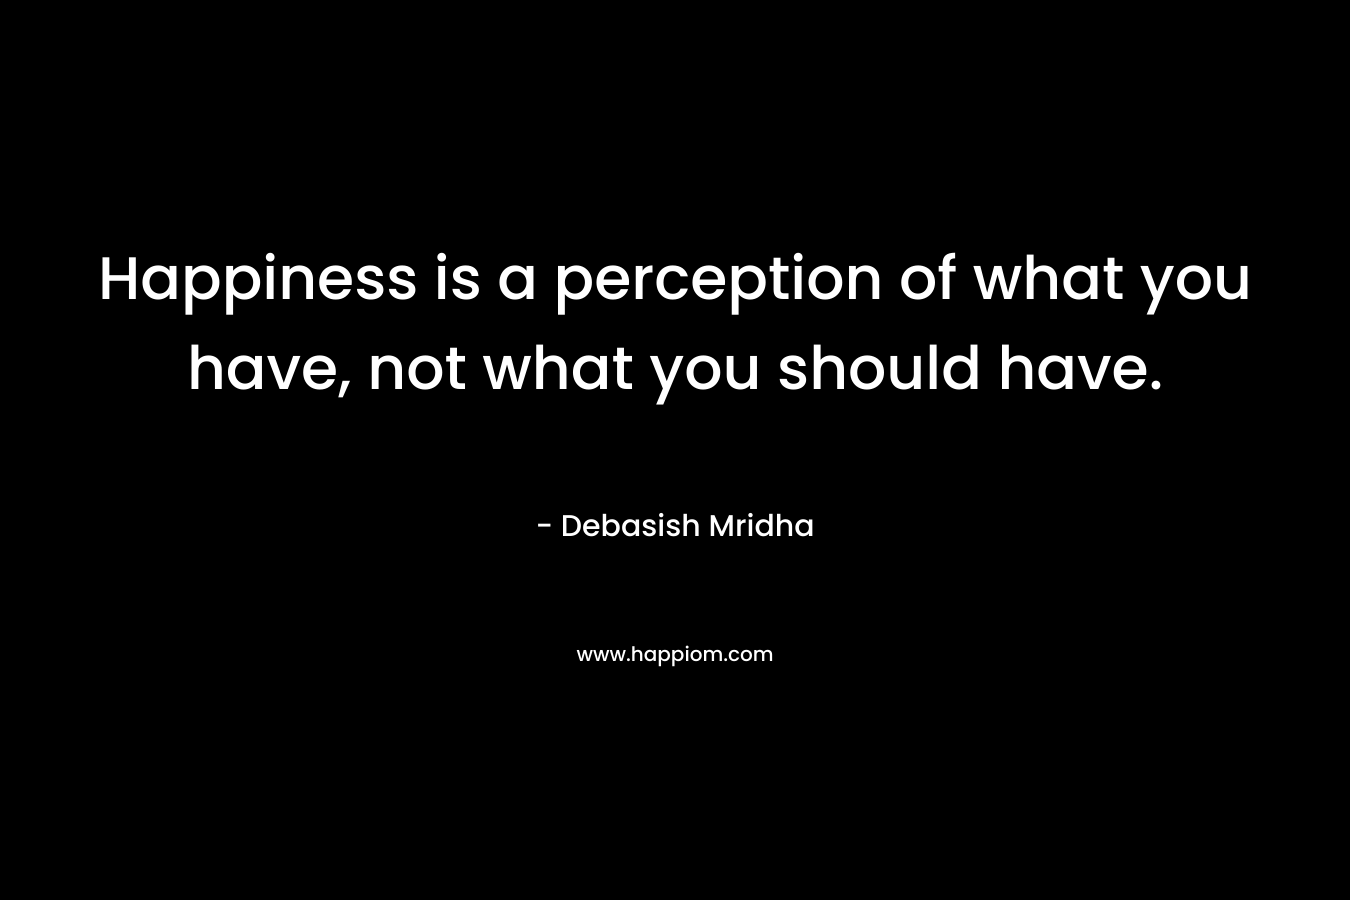 Happiness is a perception of what you have, not what you should have.